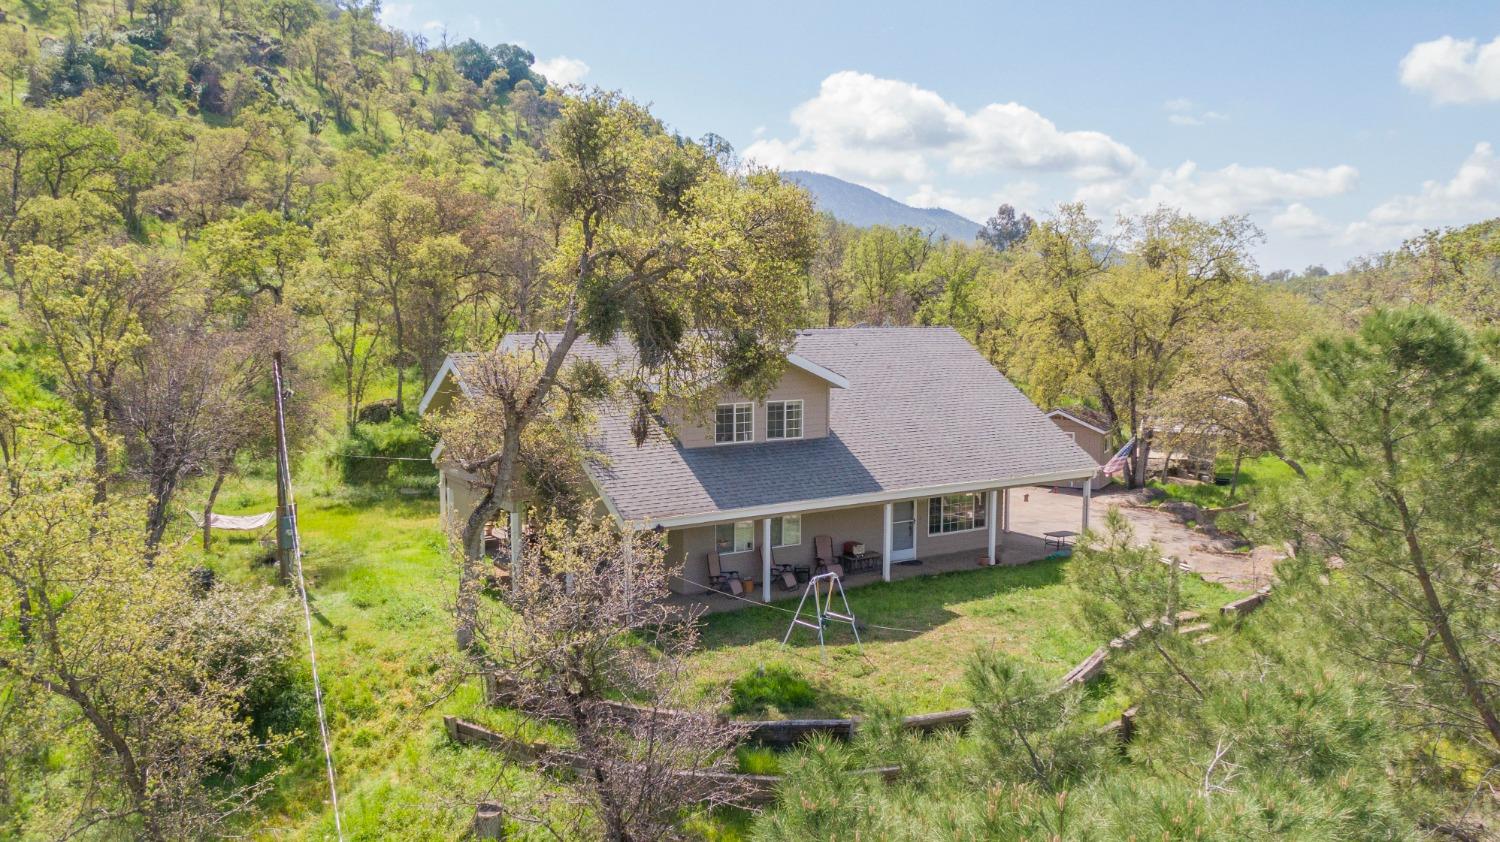 Photo of 35171 Sand Creek Rd in Squaw Valley, CA